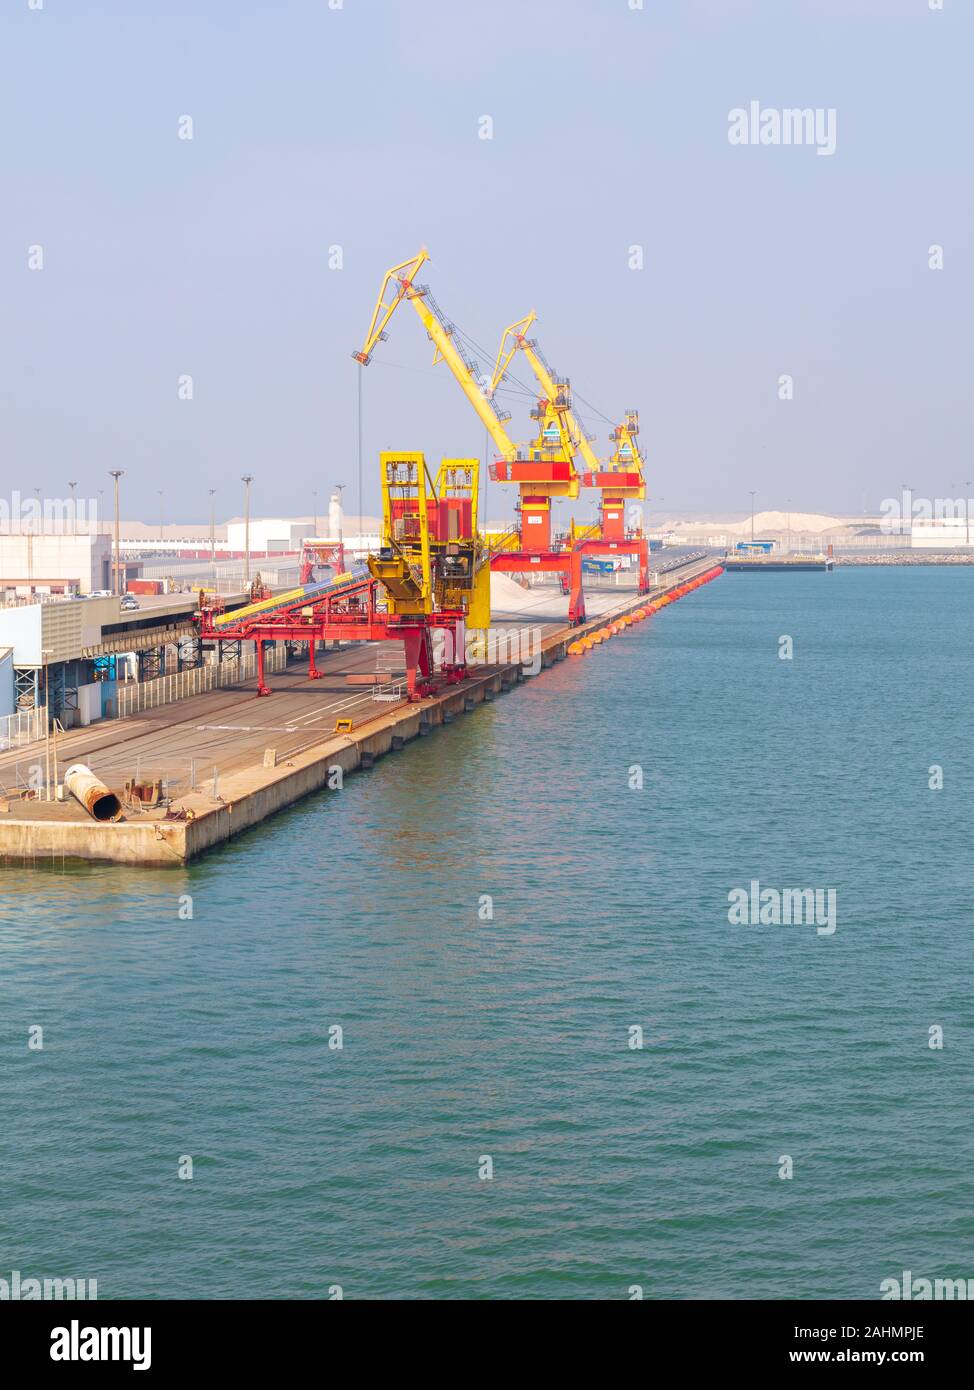 Calais, France; 20th May 2018; Brightly Coloured Cranes in the Port Stock Photo